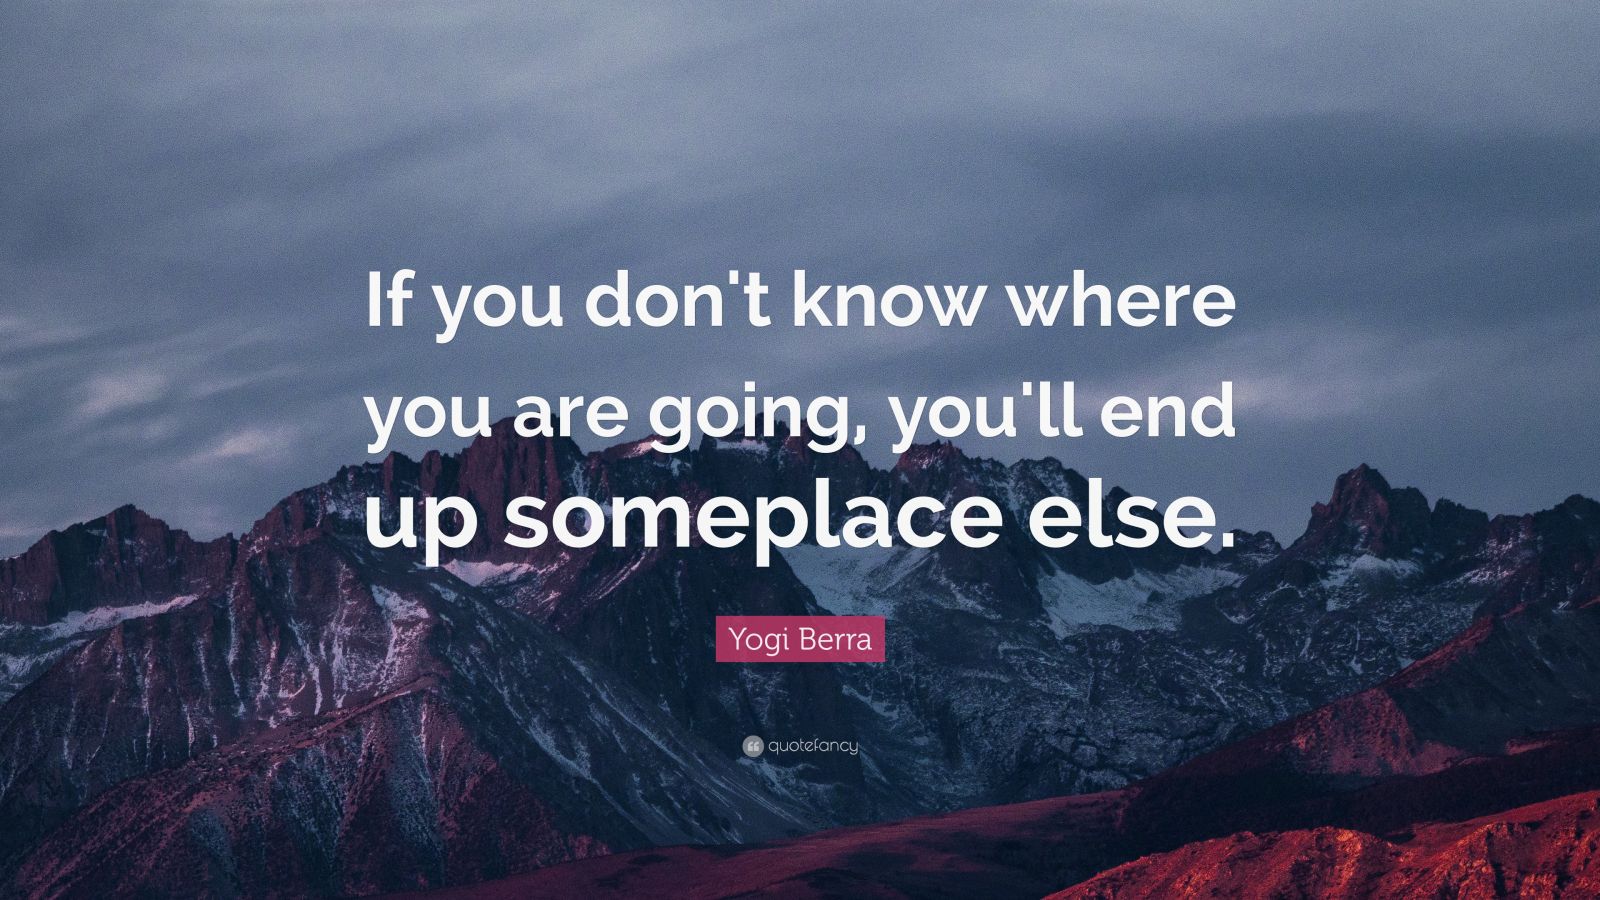 Yogi Berra Quote: “If you don't know where you are going, you'll end up ...